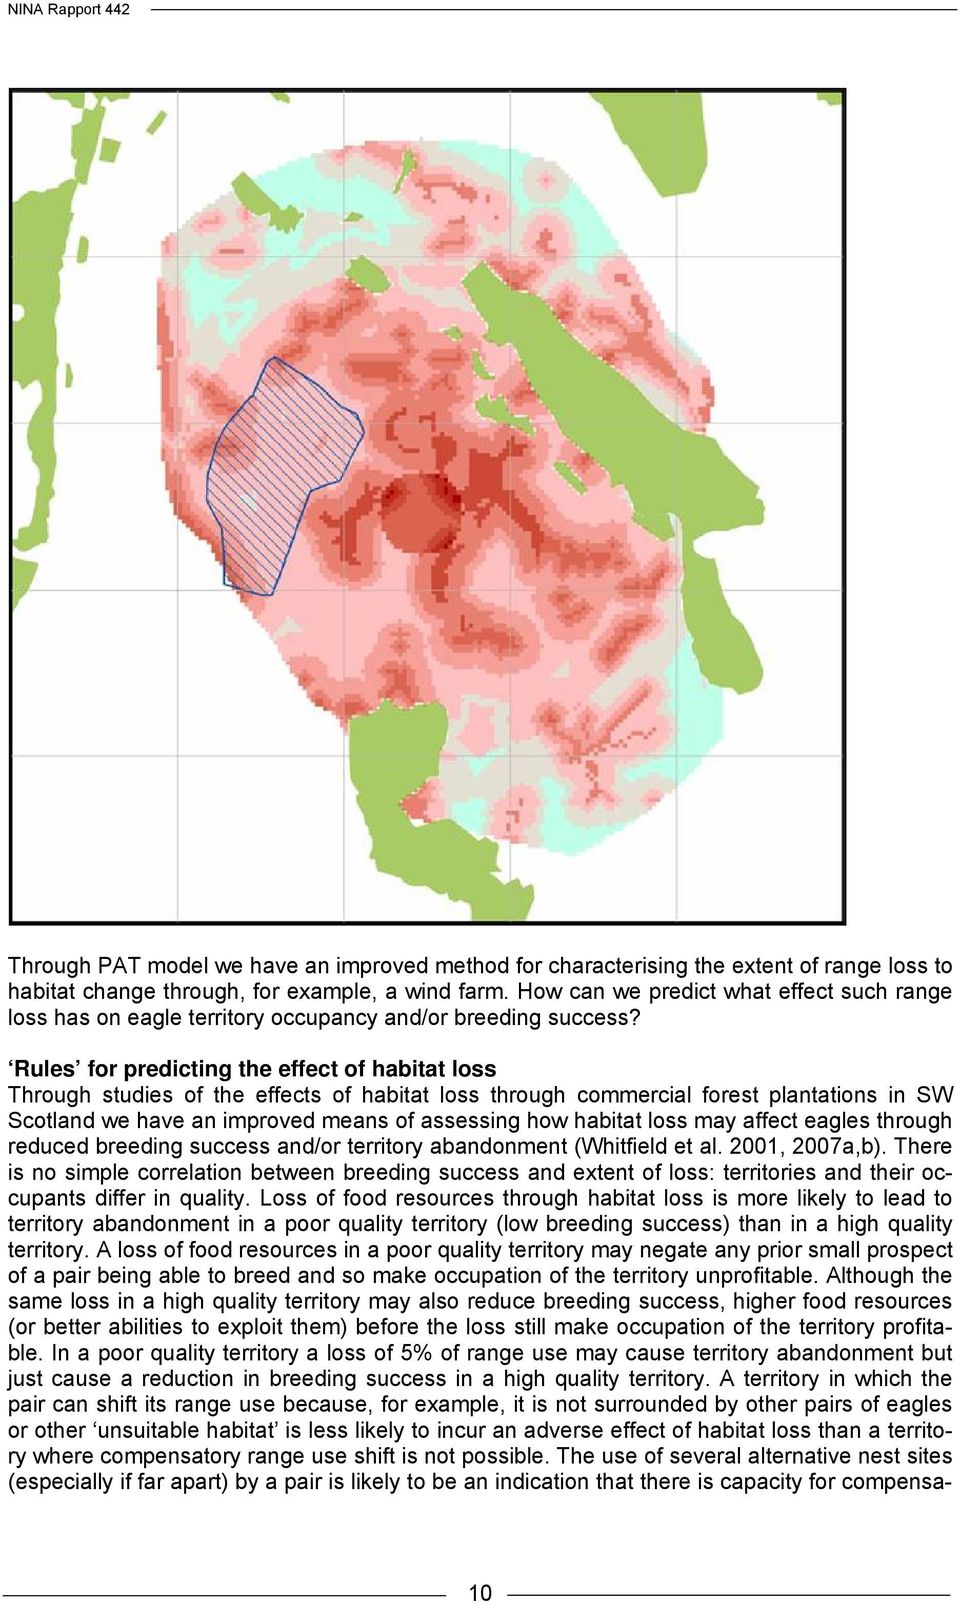 Rules for predicting the effect of habitat loss Through studies of the effects of habitat loss through commercial forest plantations in SW Scotland we have an improved means of assessing how habitat